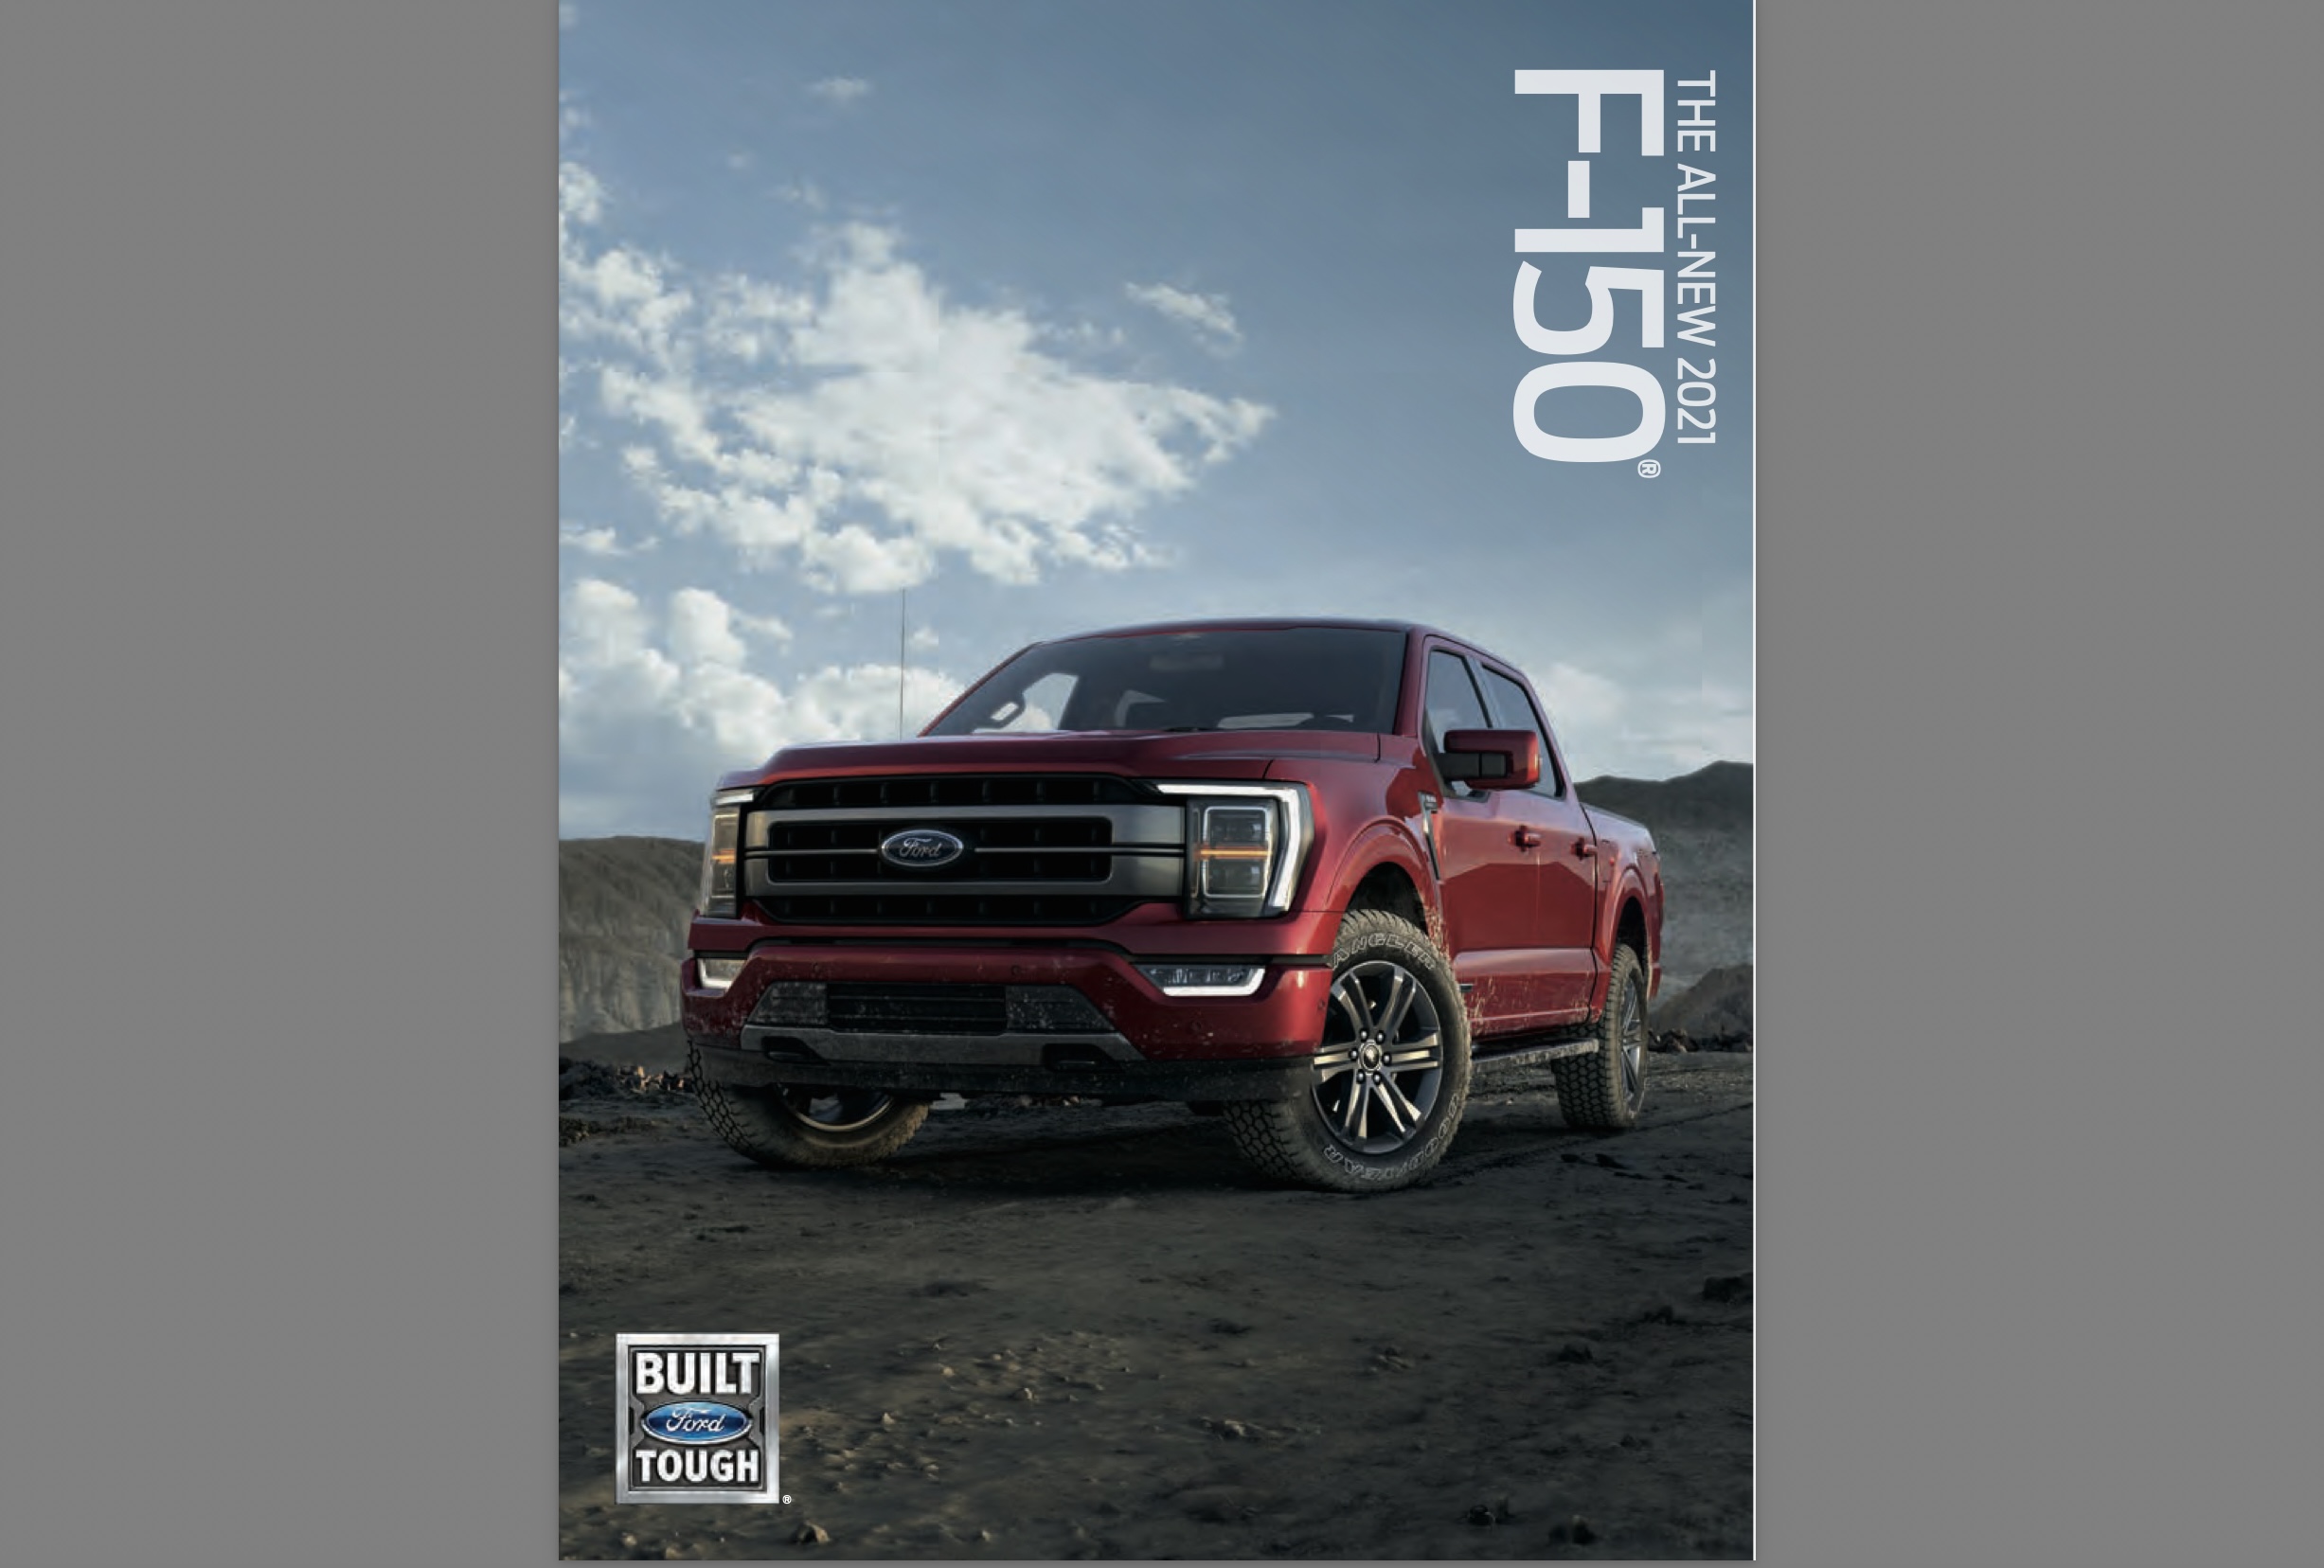 2021 F150 Brochure Published 2021+ Ford F150